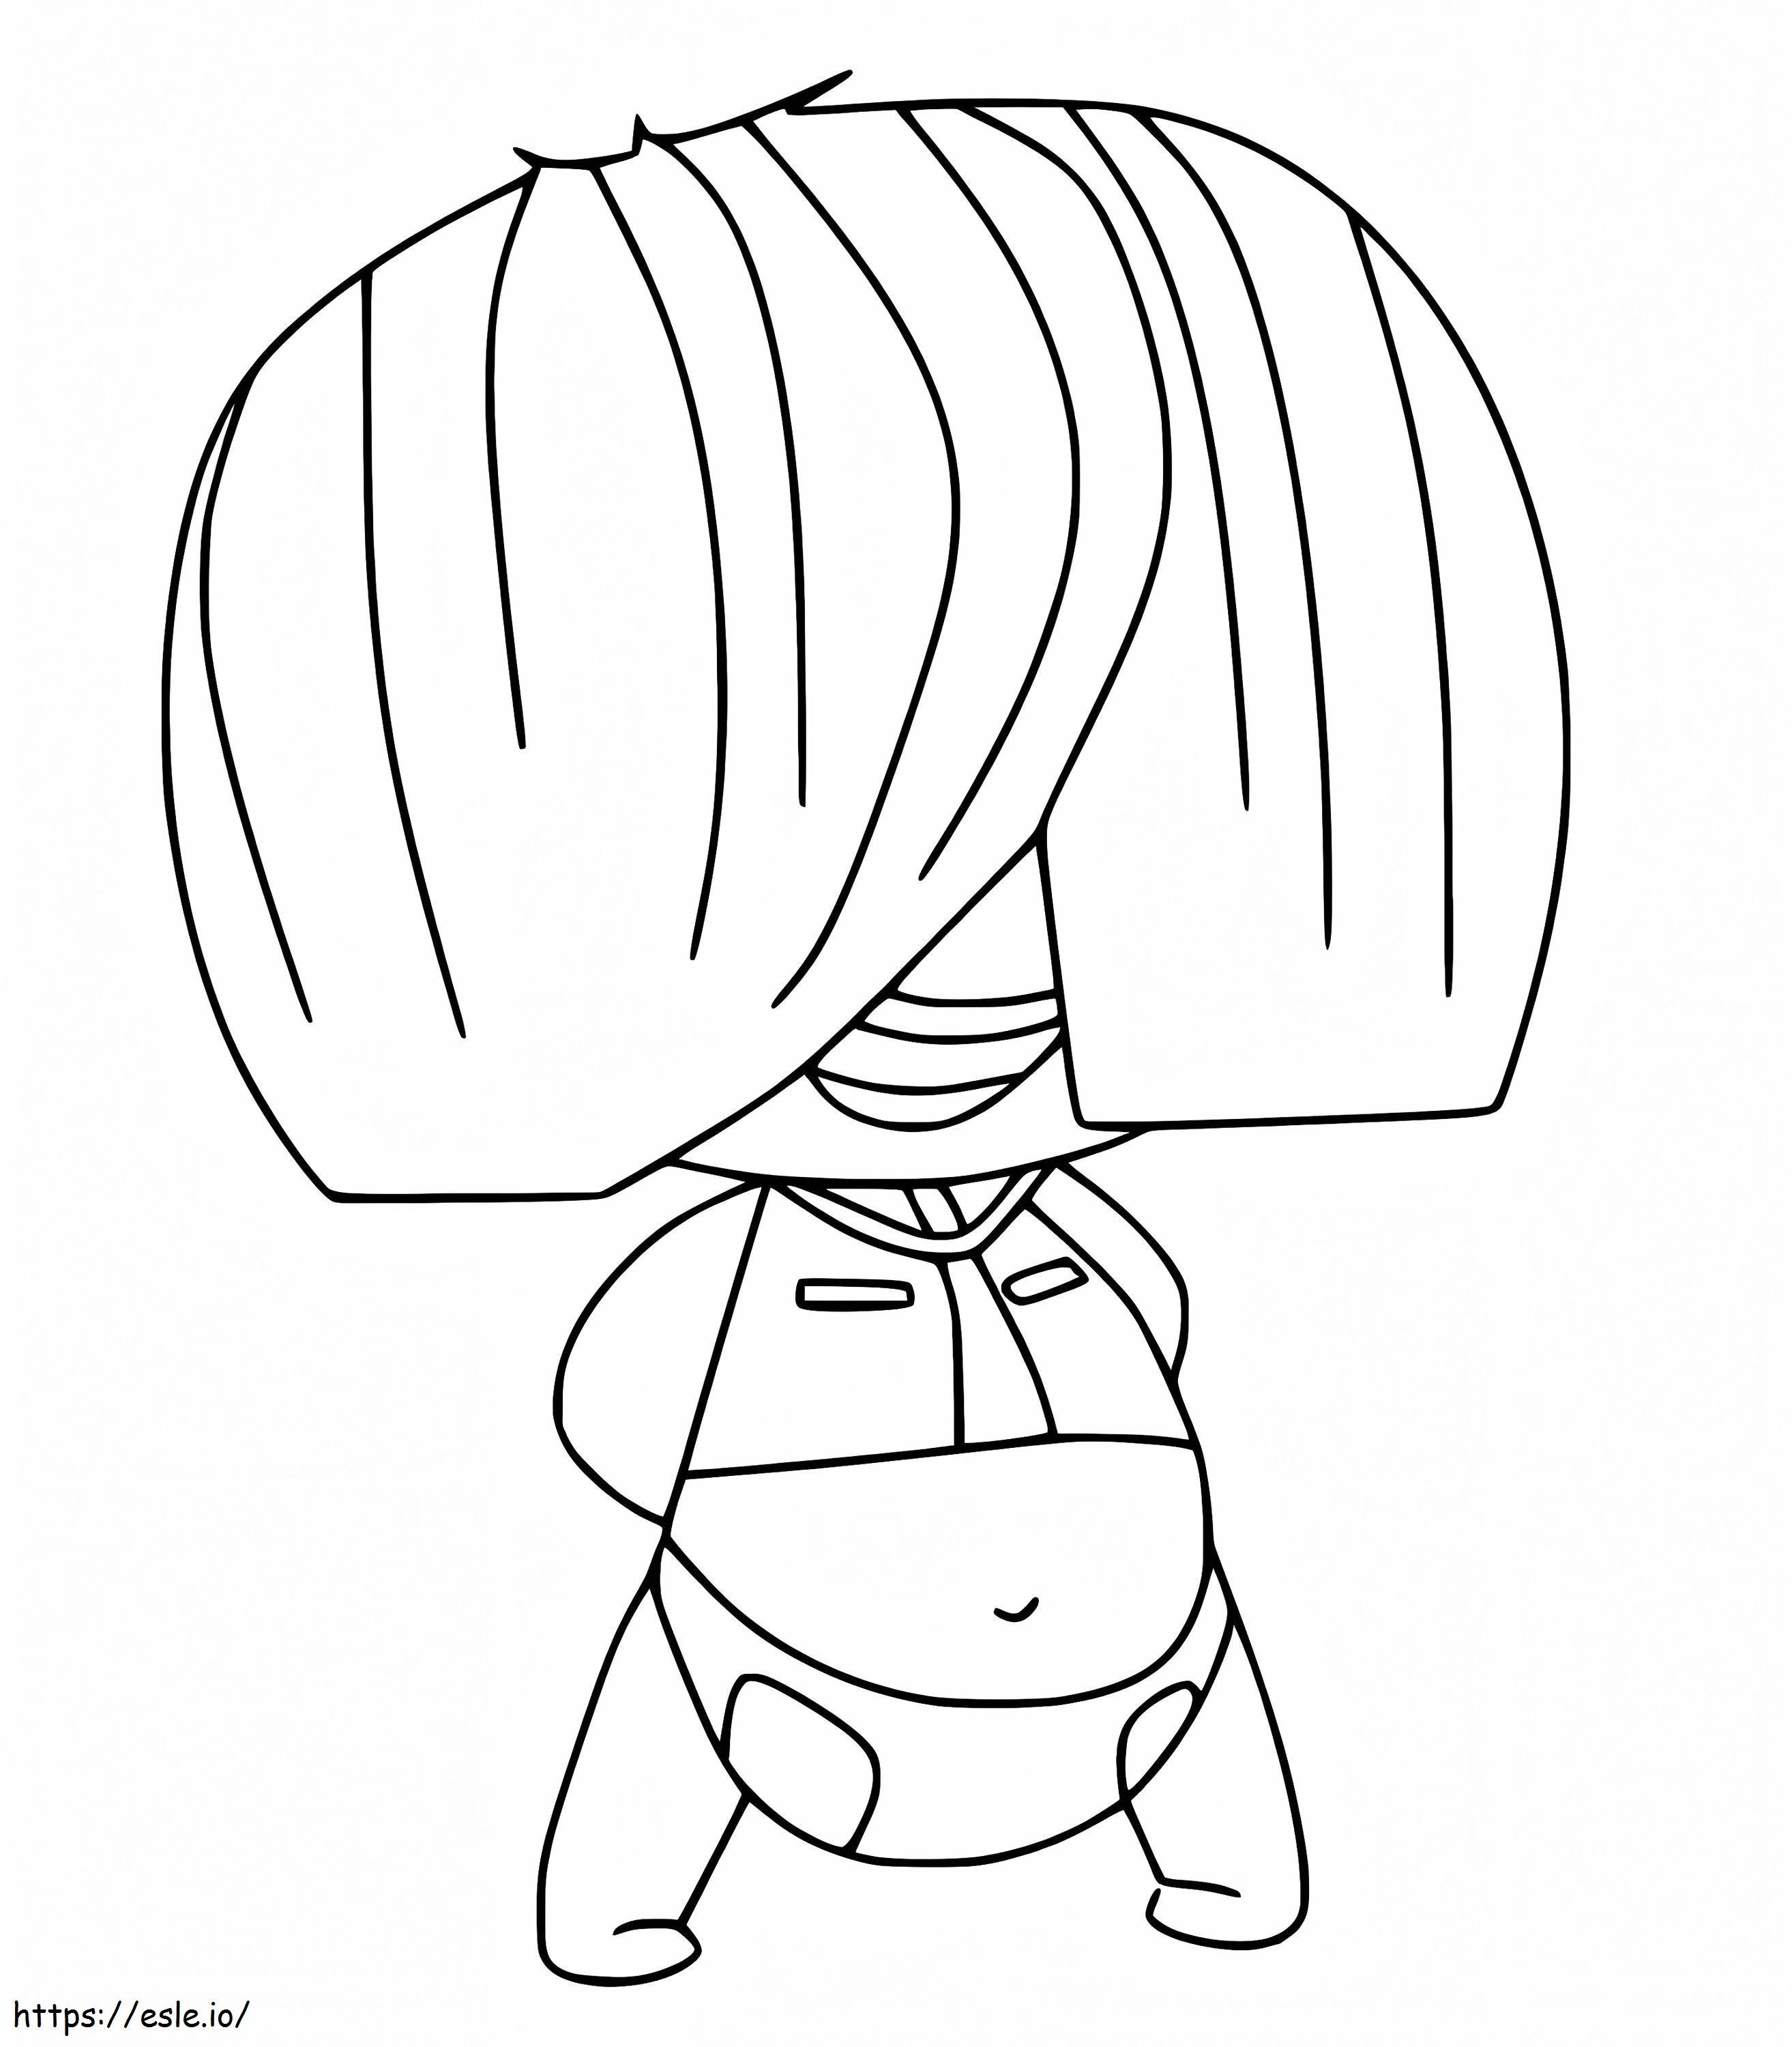 Little Fuz From Mini Beat coloring page